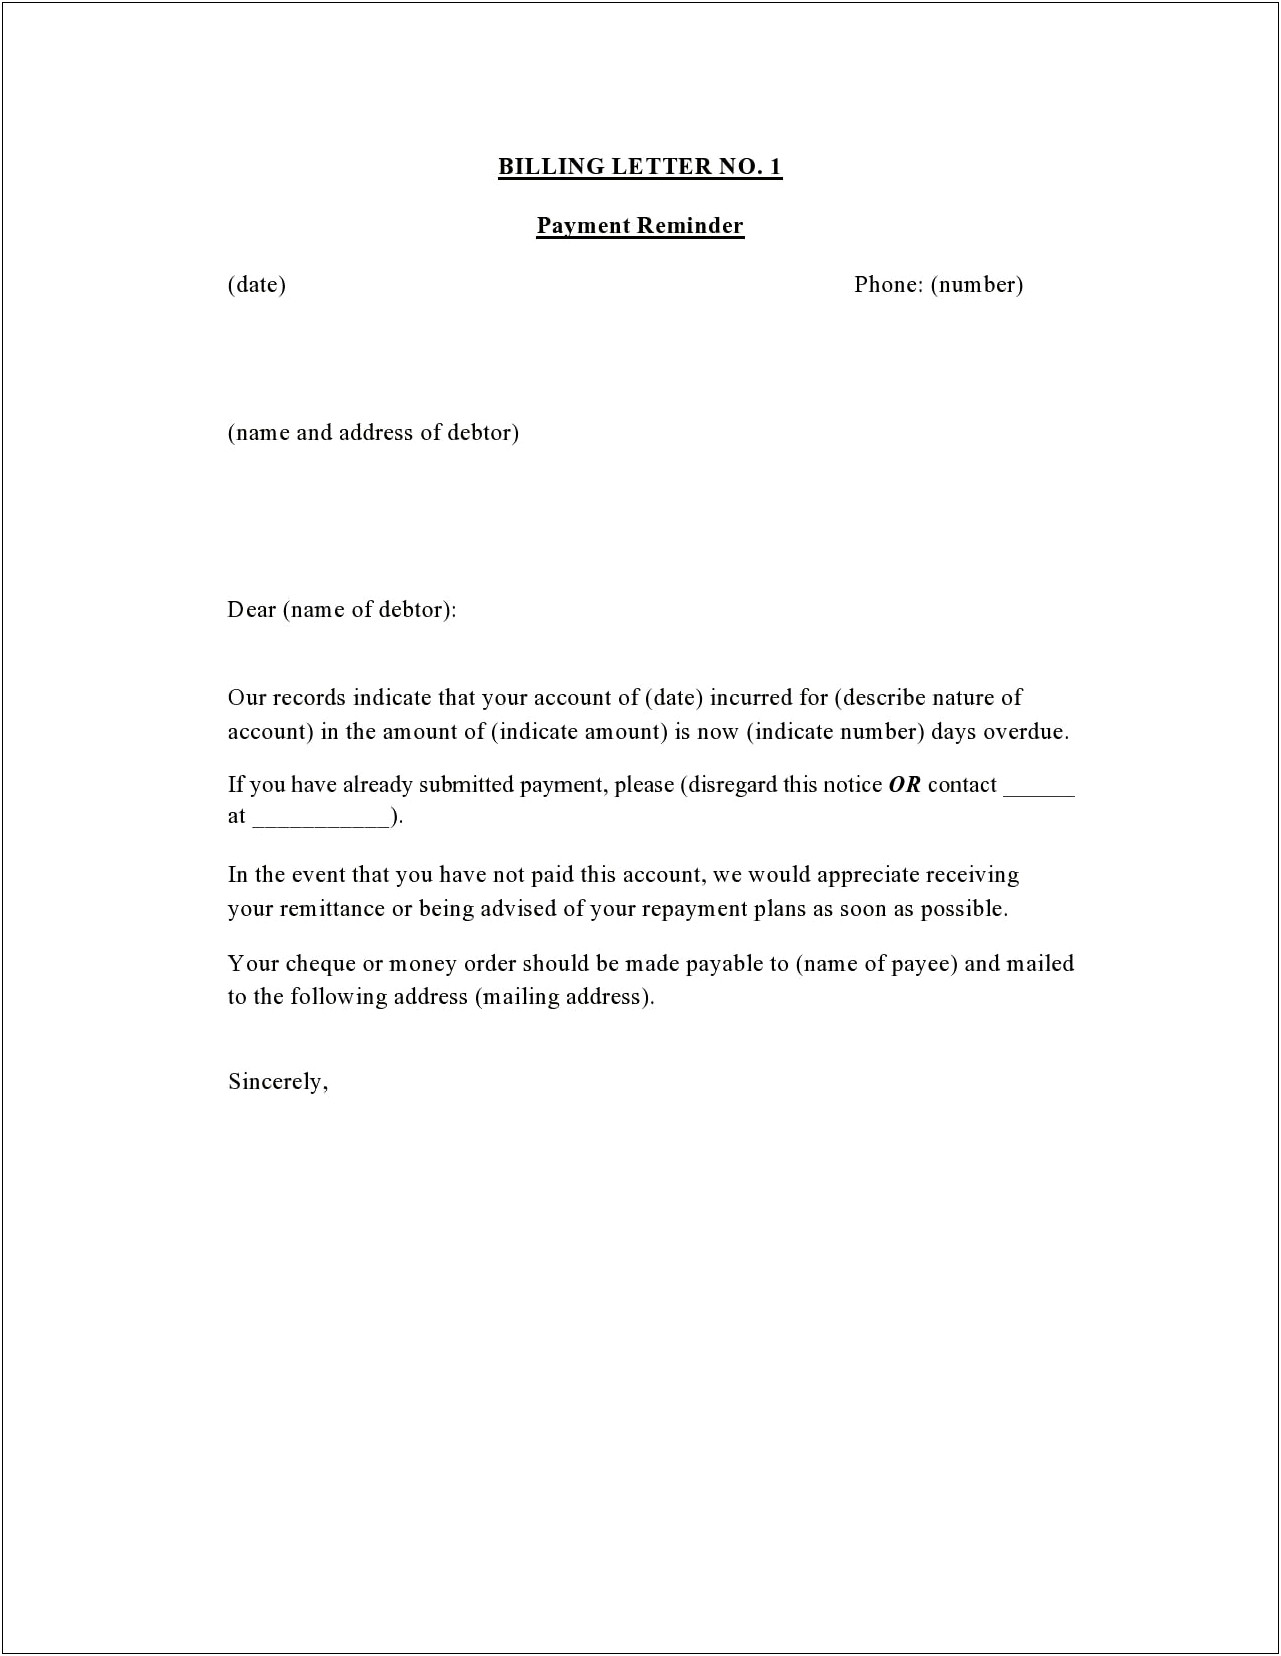 Final Reminder Letter For Payment Template